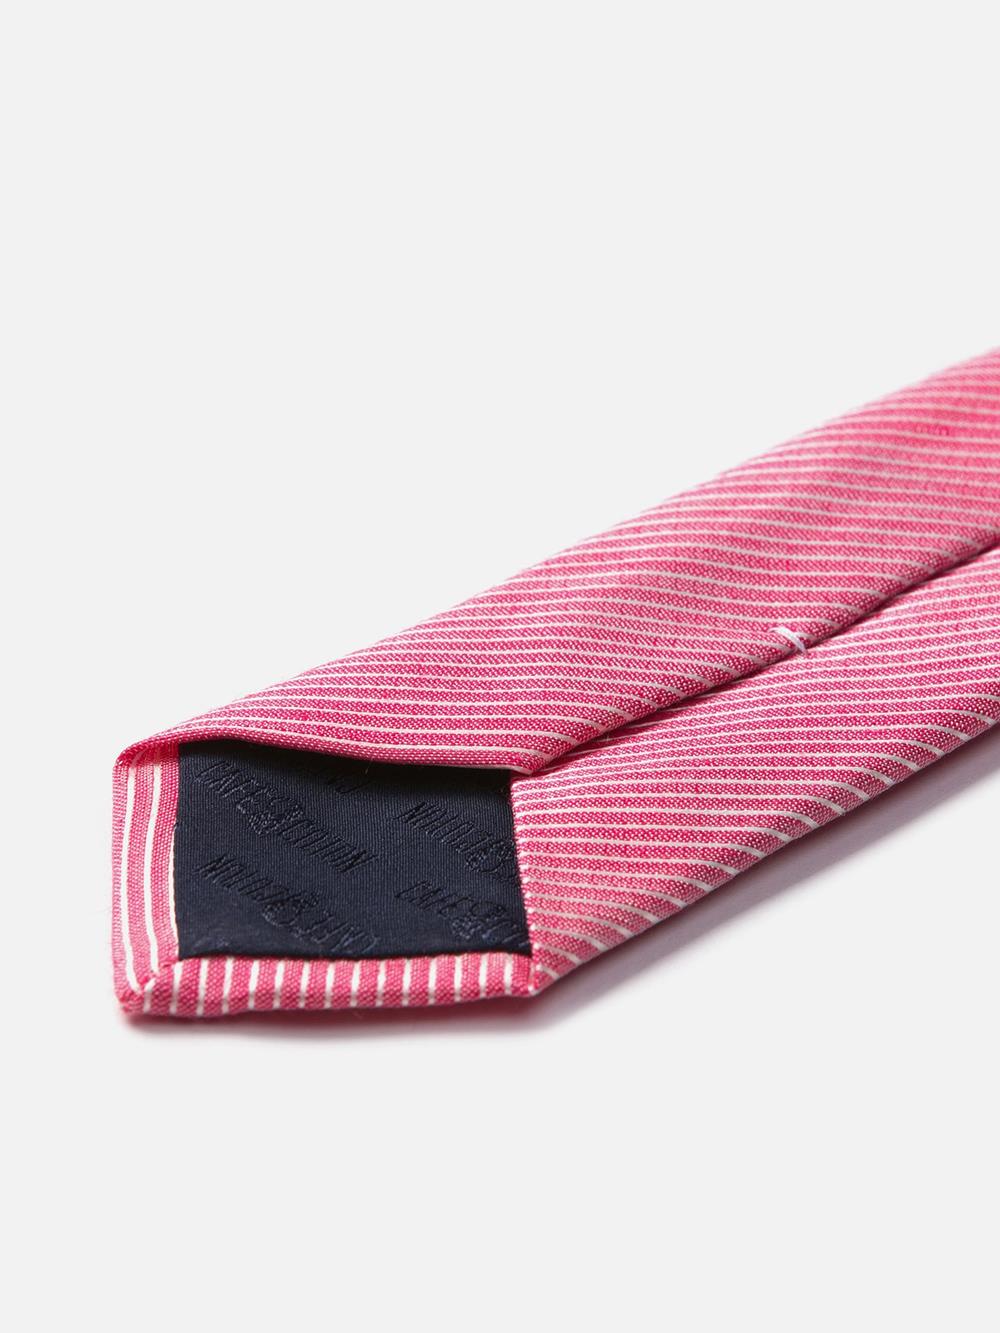 SLIM tie in linen and fuchsia silk with micro scratches